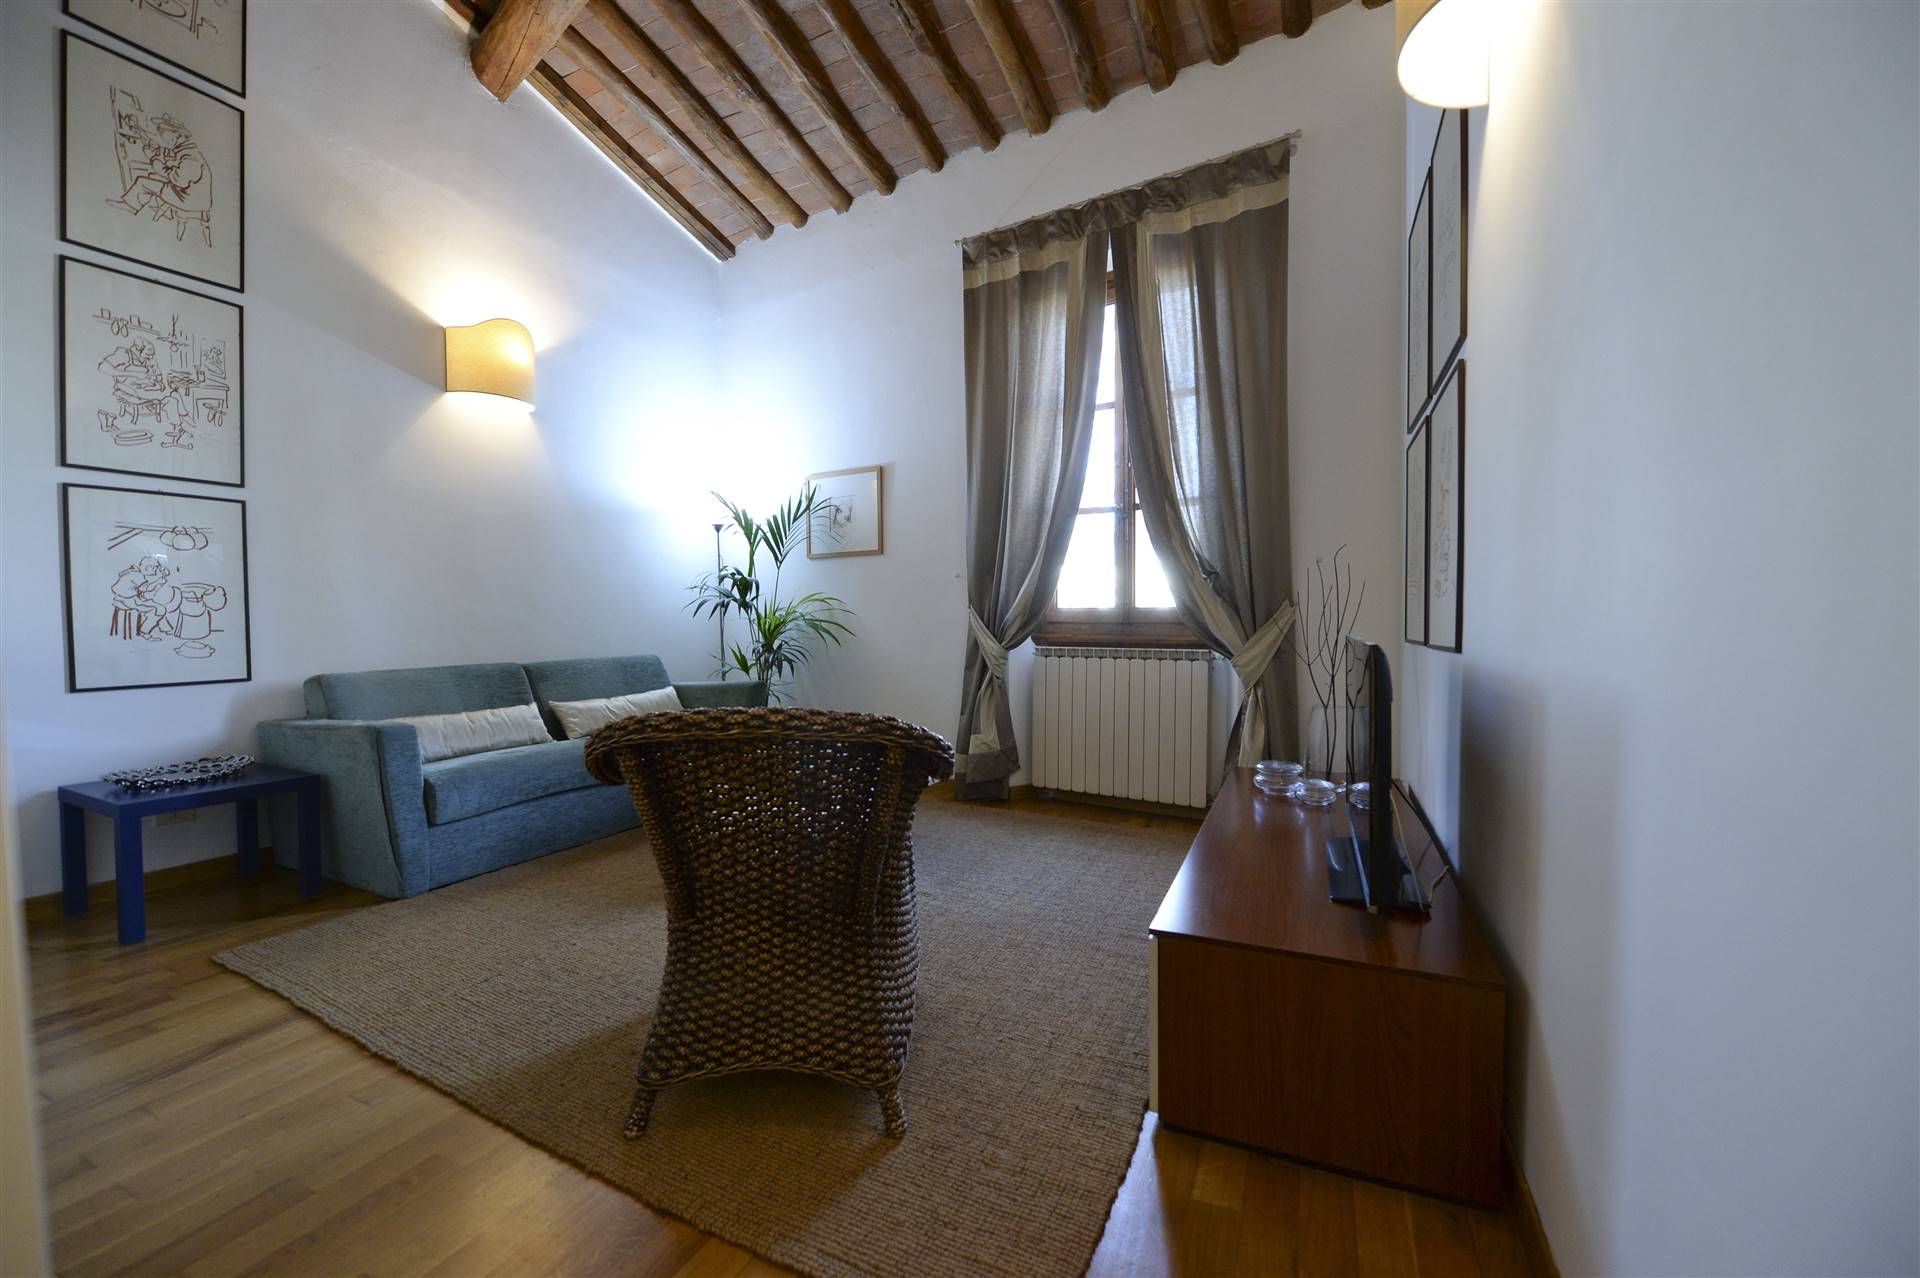 LUNGARNO DI SANTA ROSA, FIRENZE, Apartment for rent of 95 Sq. mt., Restored, Heating Individual heating system, Energetic class: G, placed at 1°, 